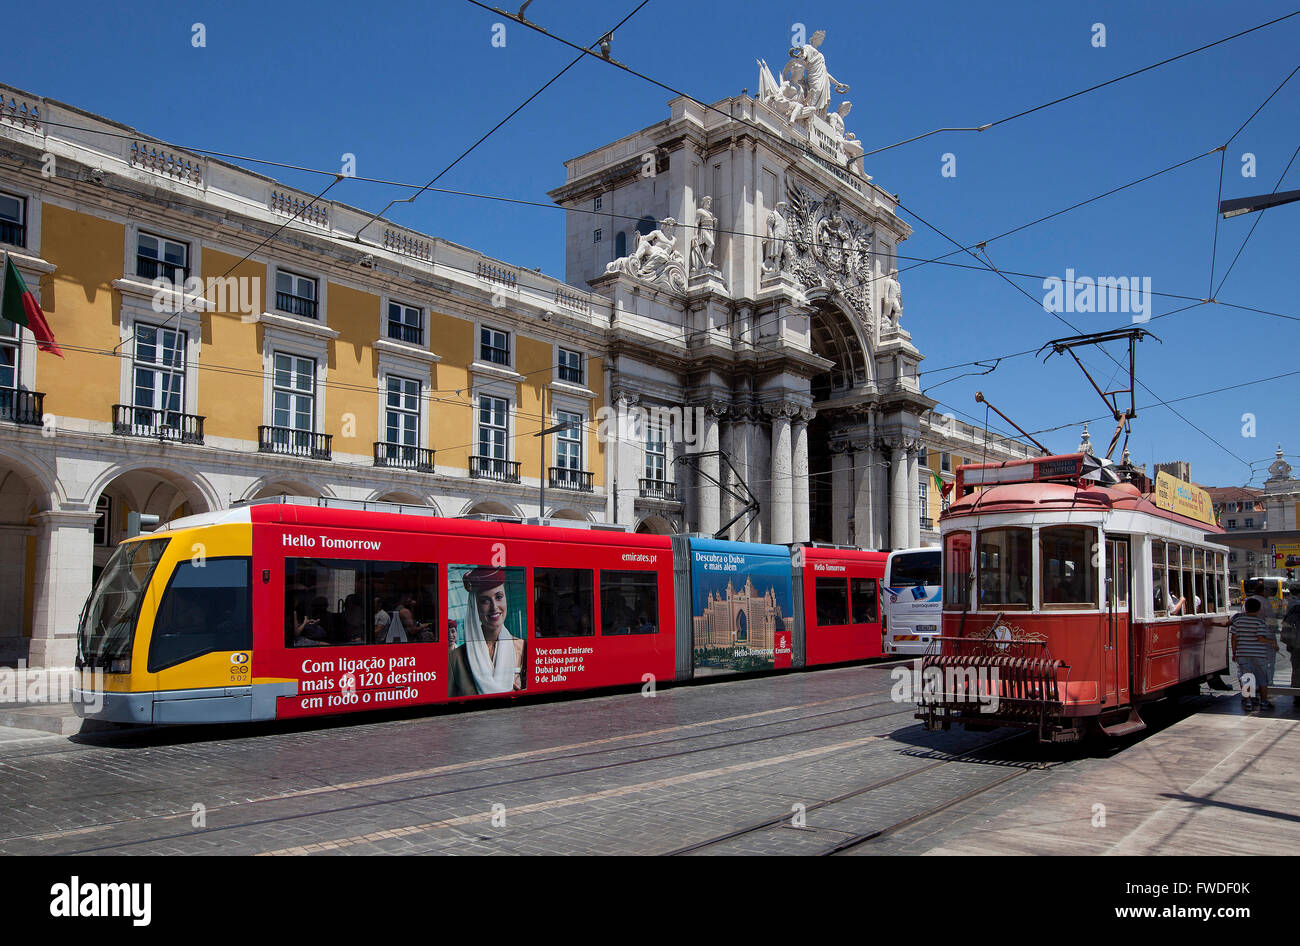 Trams and funiculars,Lisbon,Portugal: modern tram and old tourist tram Stock Photo